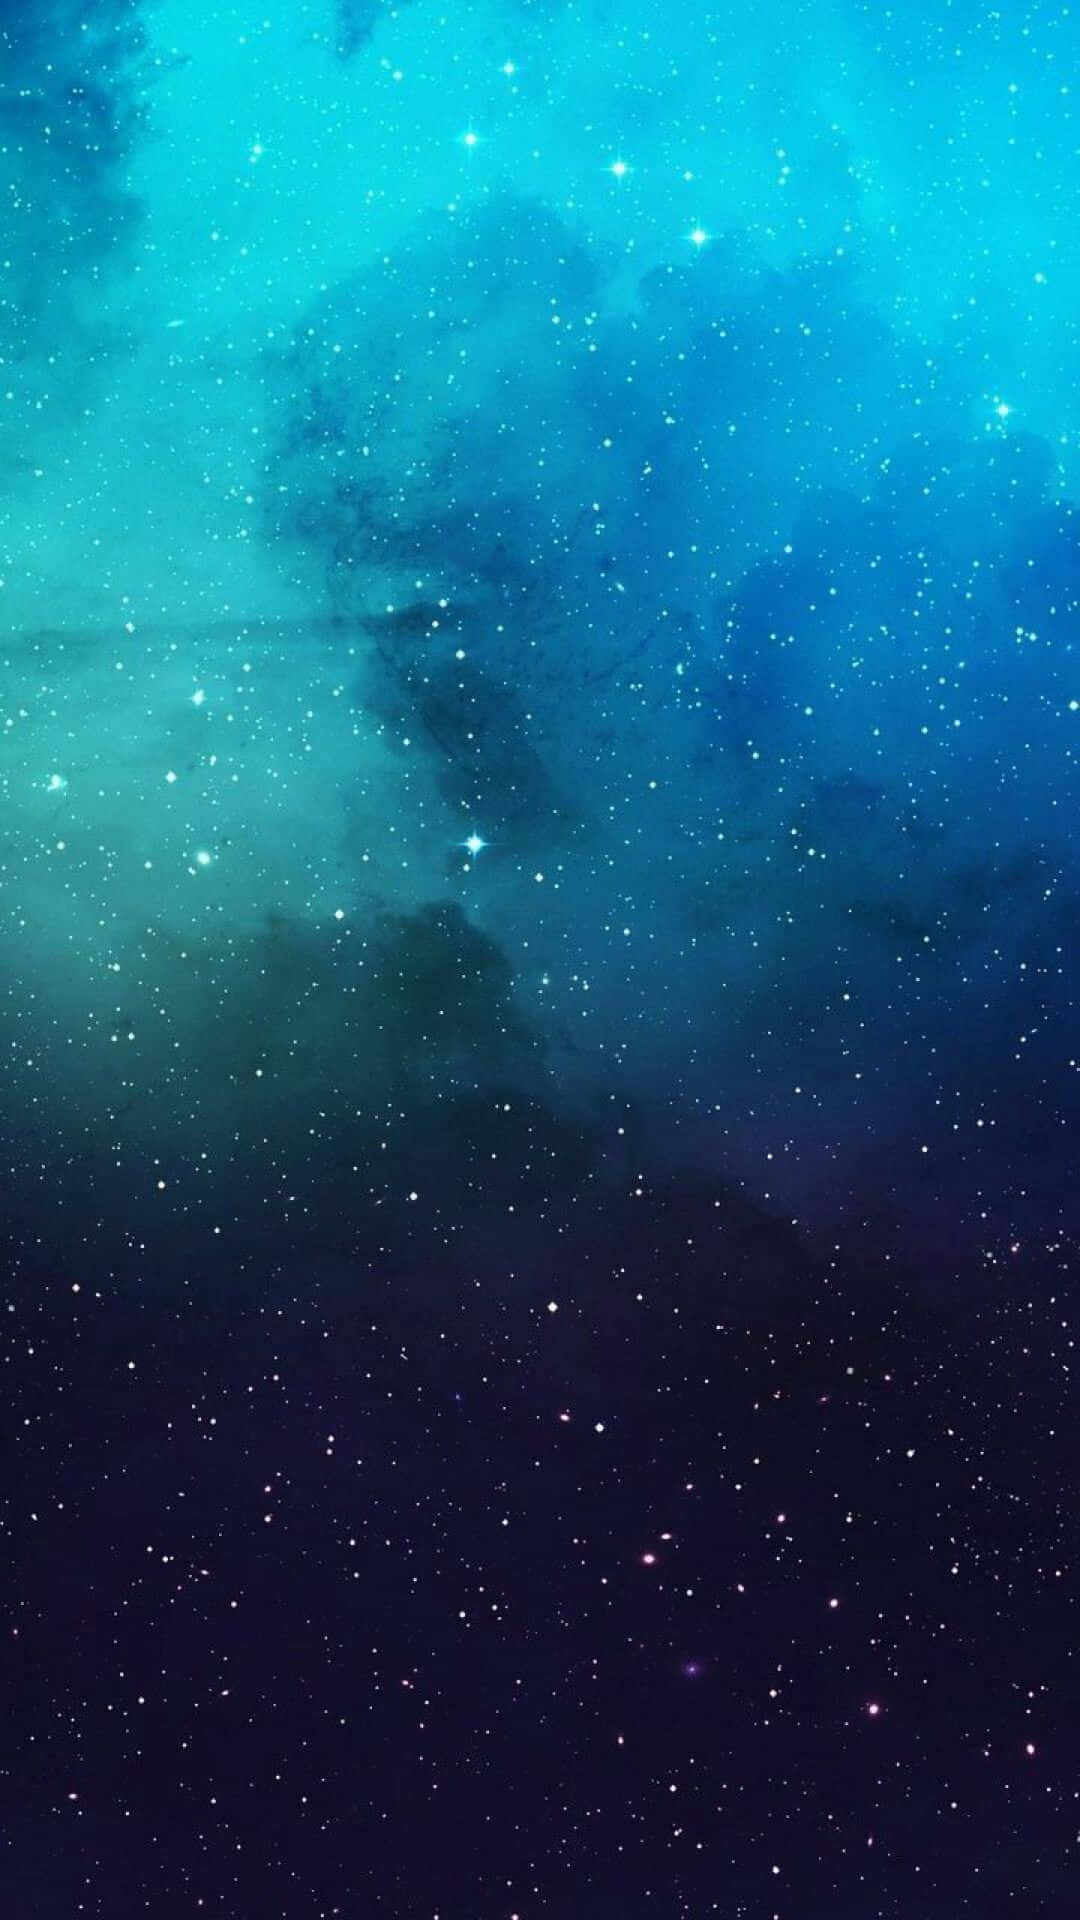 Relax And Let Yourself Go With This Calming Blue Aesthetic Wallpaper